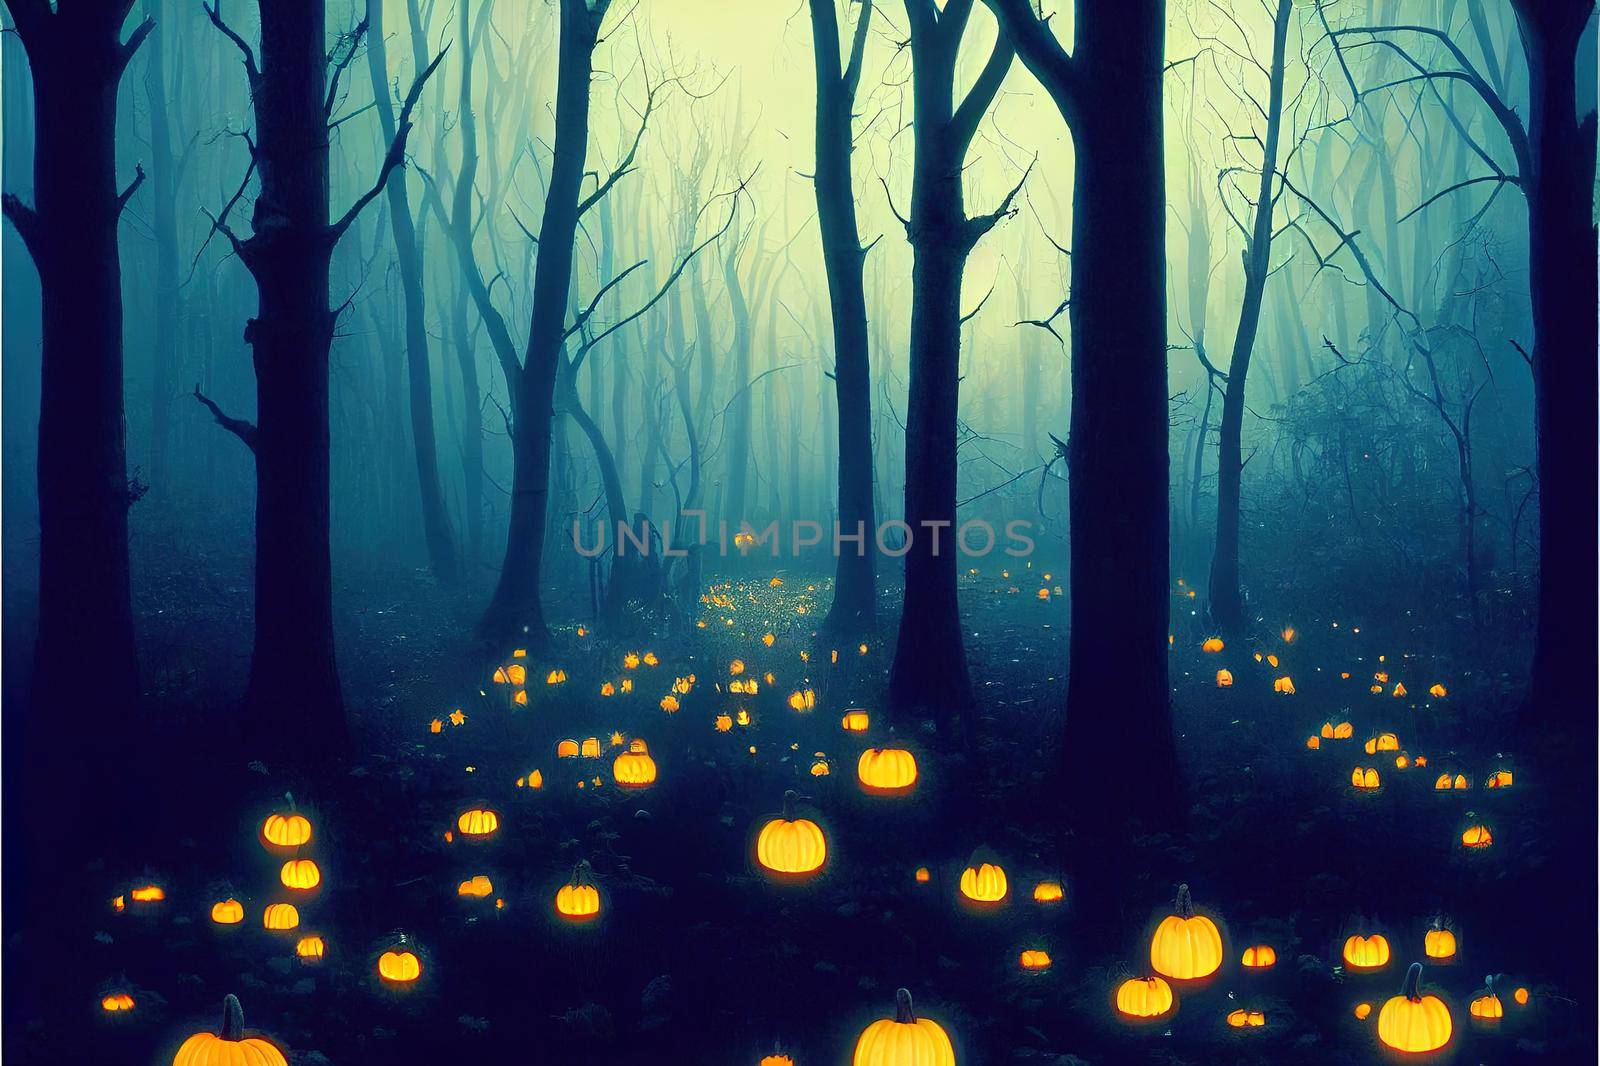 Dark woods halloween background forest at night with blue by 2ragon